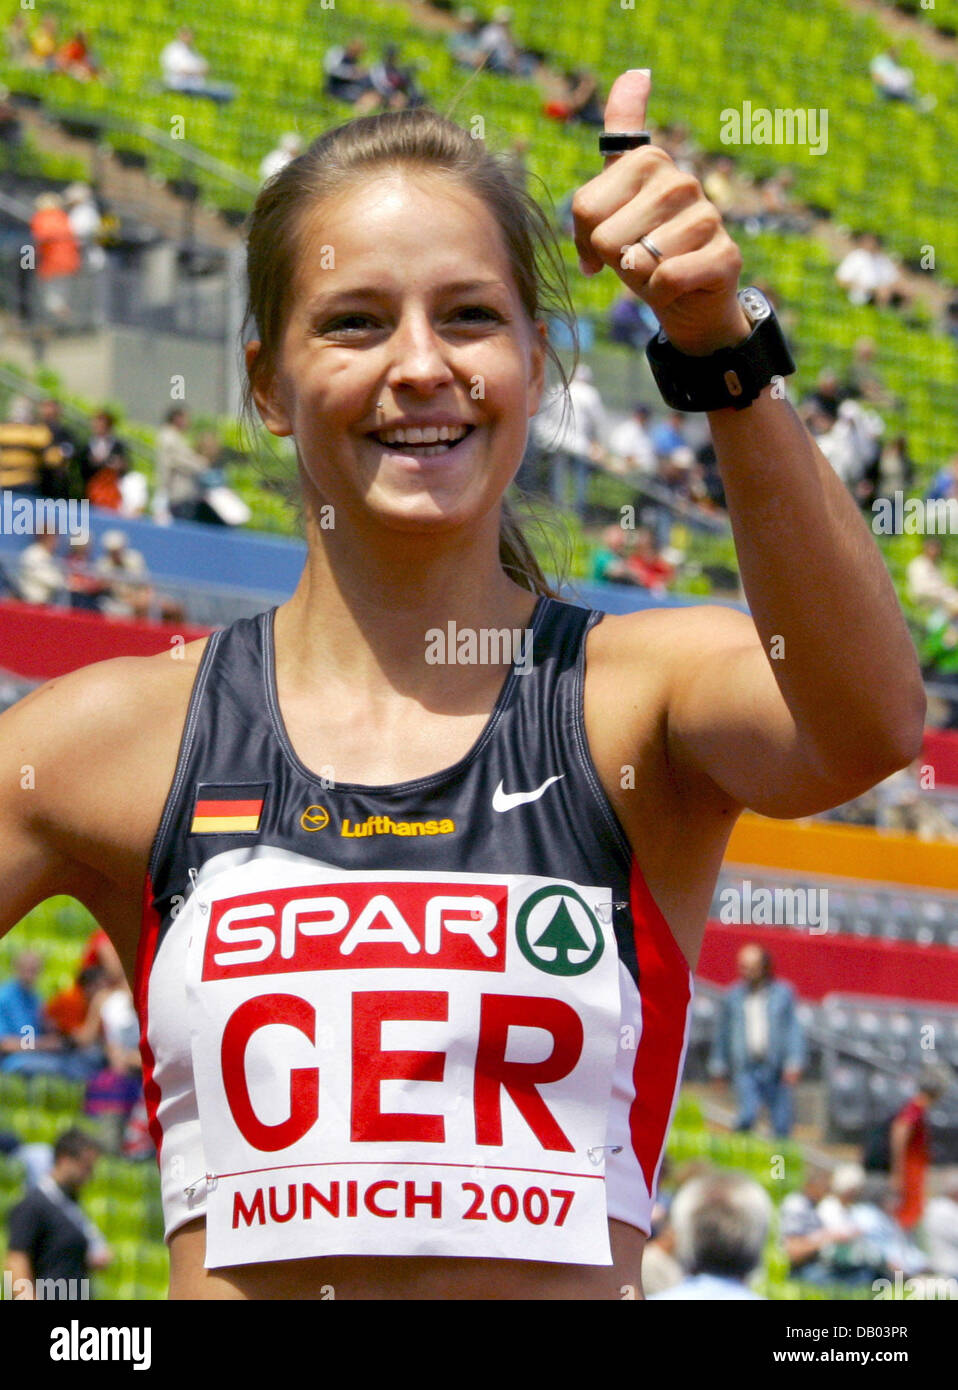 German sprinter Sina Schielke cheers after finishing the second run of the 100m sprint competition in 11,21 seconds at the SPAR European Cup in Munich, Germany, 23 June 2007. Schielke is the first German this year to underbid the norm for the world championships in Japan in August. Photo: Matthias Schrader Stock Photo